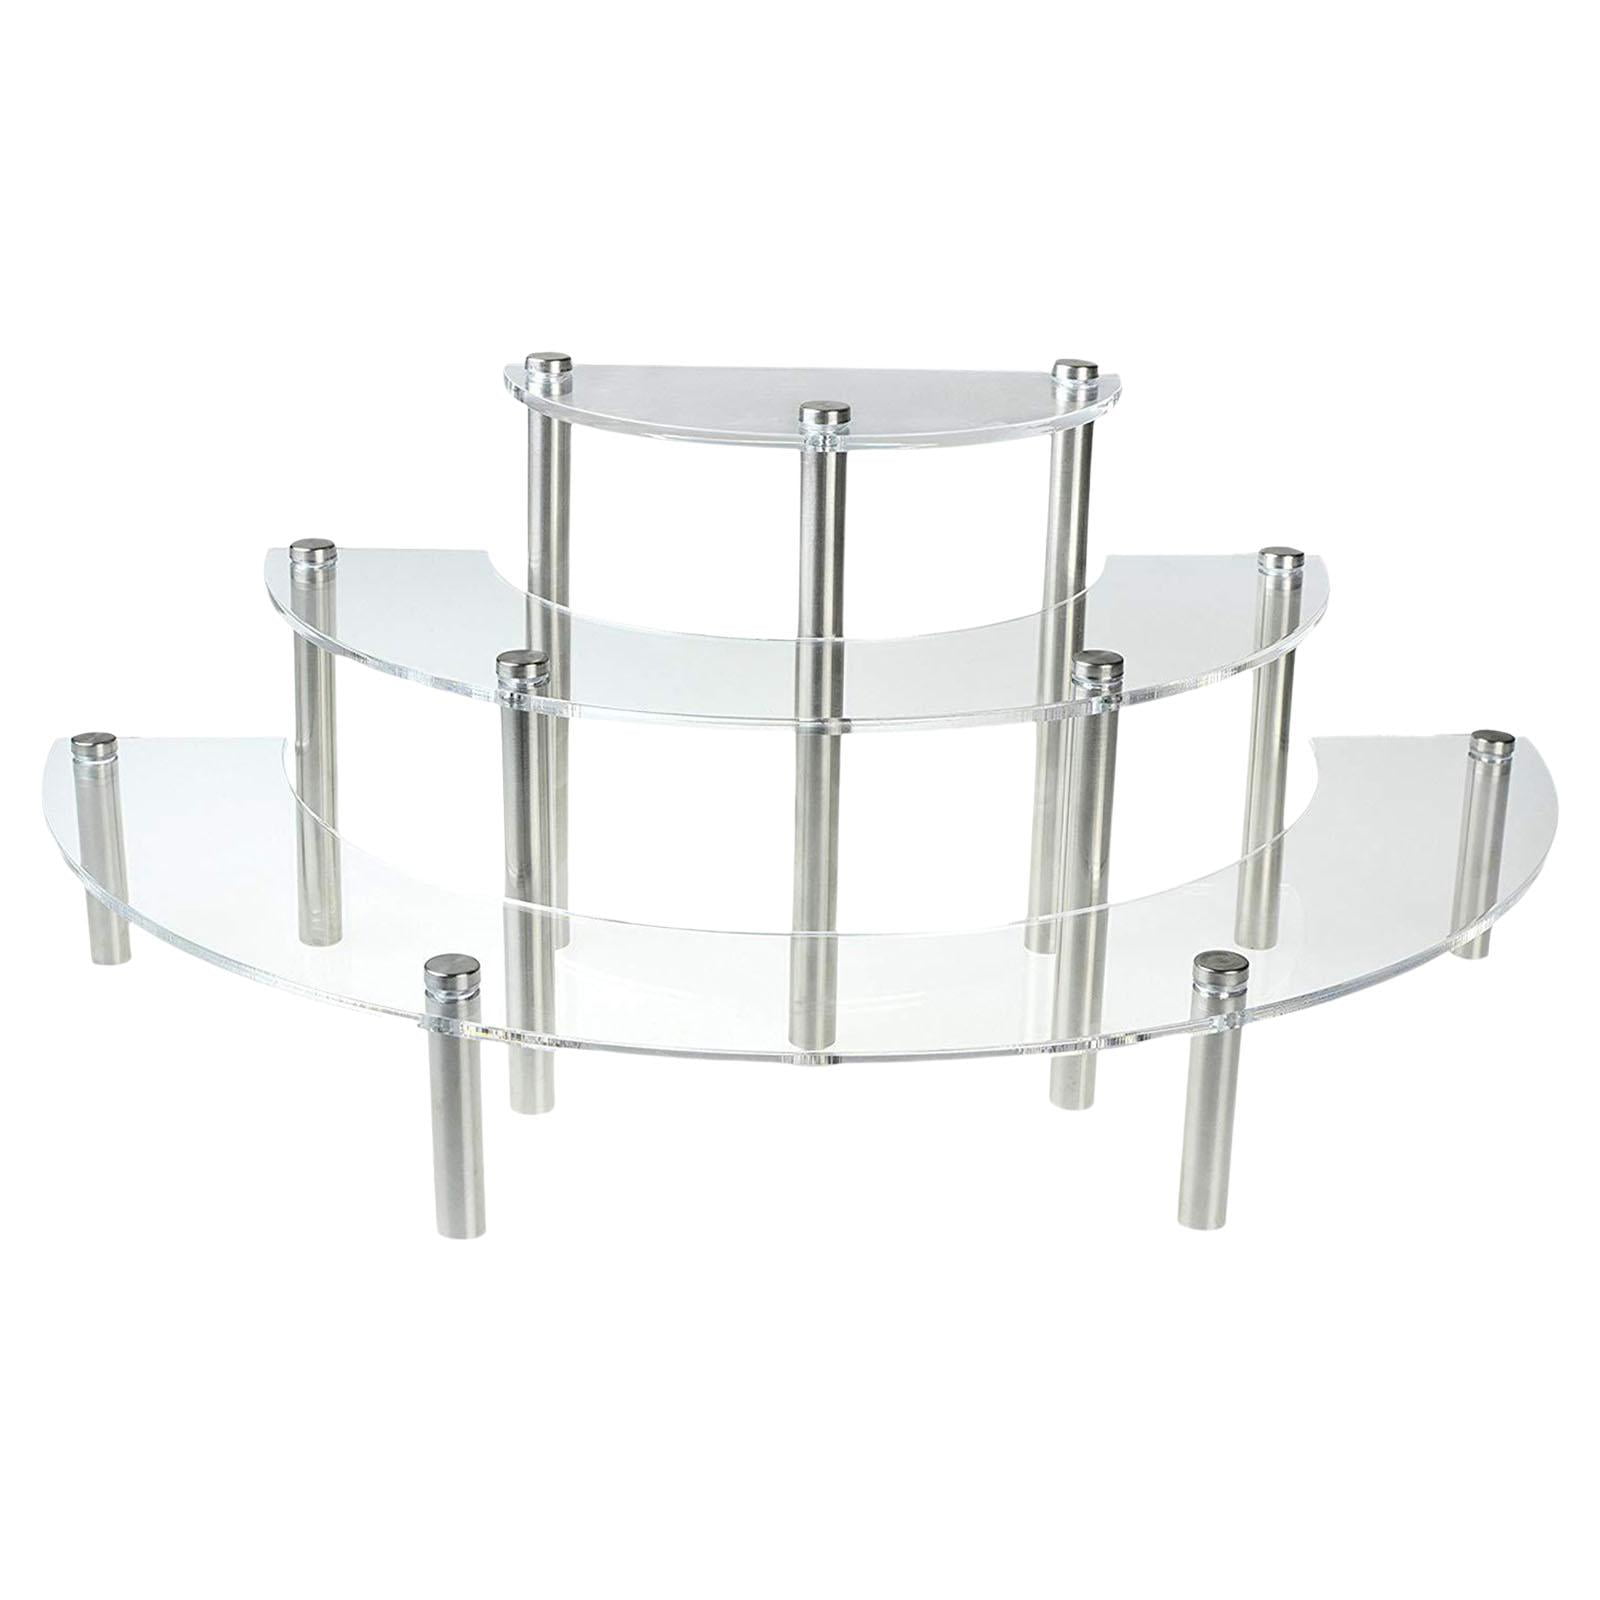 NIUBEE Buffet Risers, Food Display Stands for Party, 6PCS Acrylic Risers  for Display Cake Collectibles Jewelry Figures Show, White Cube Dessert  Table